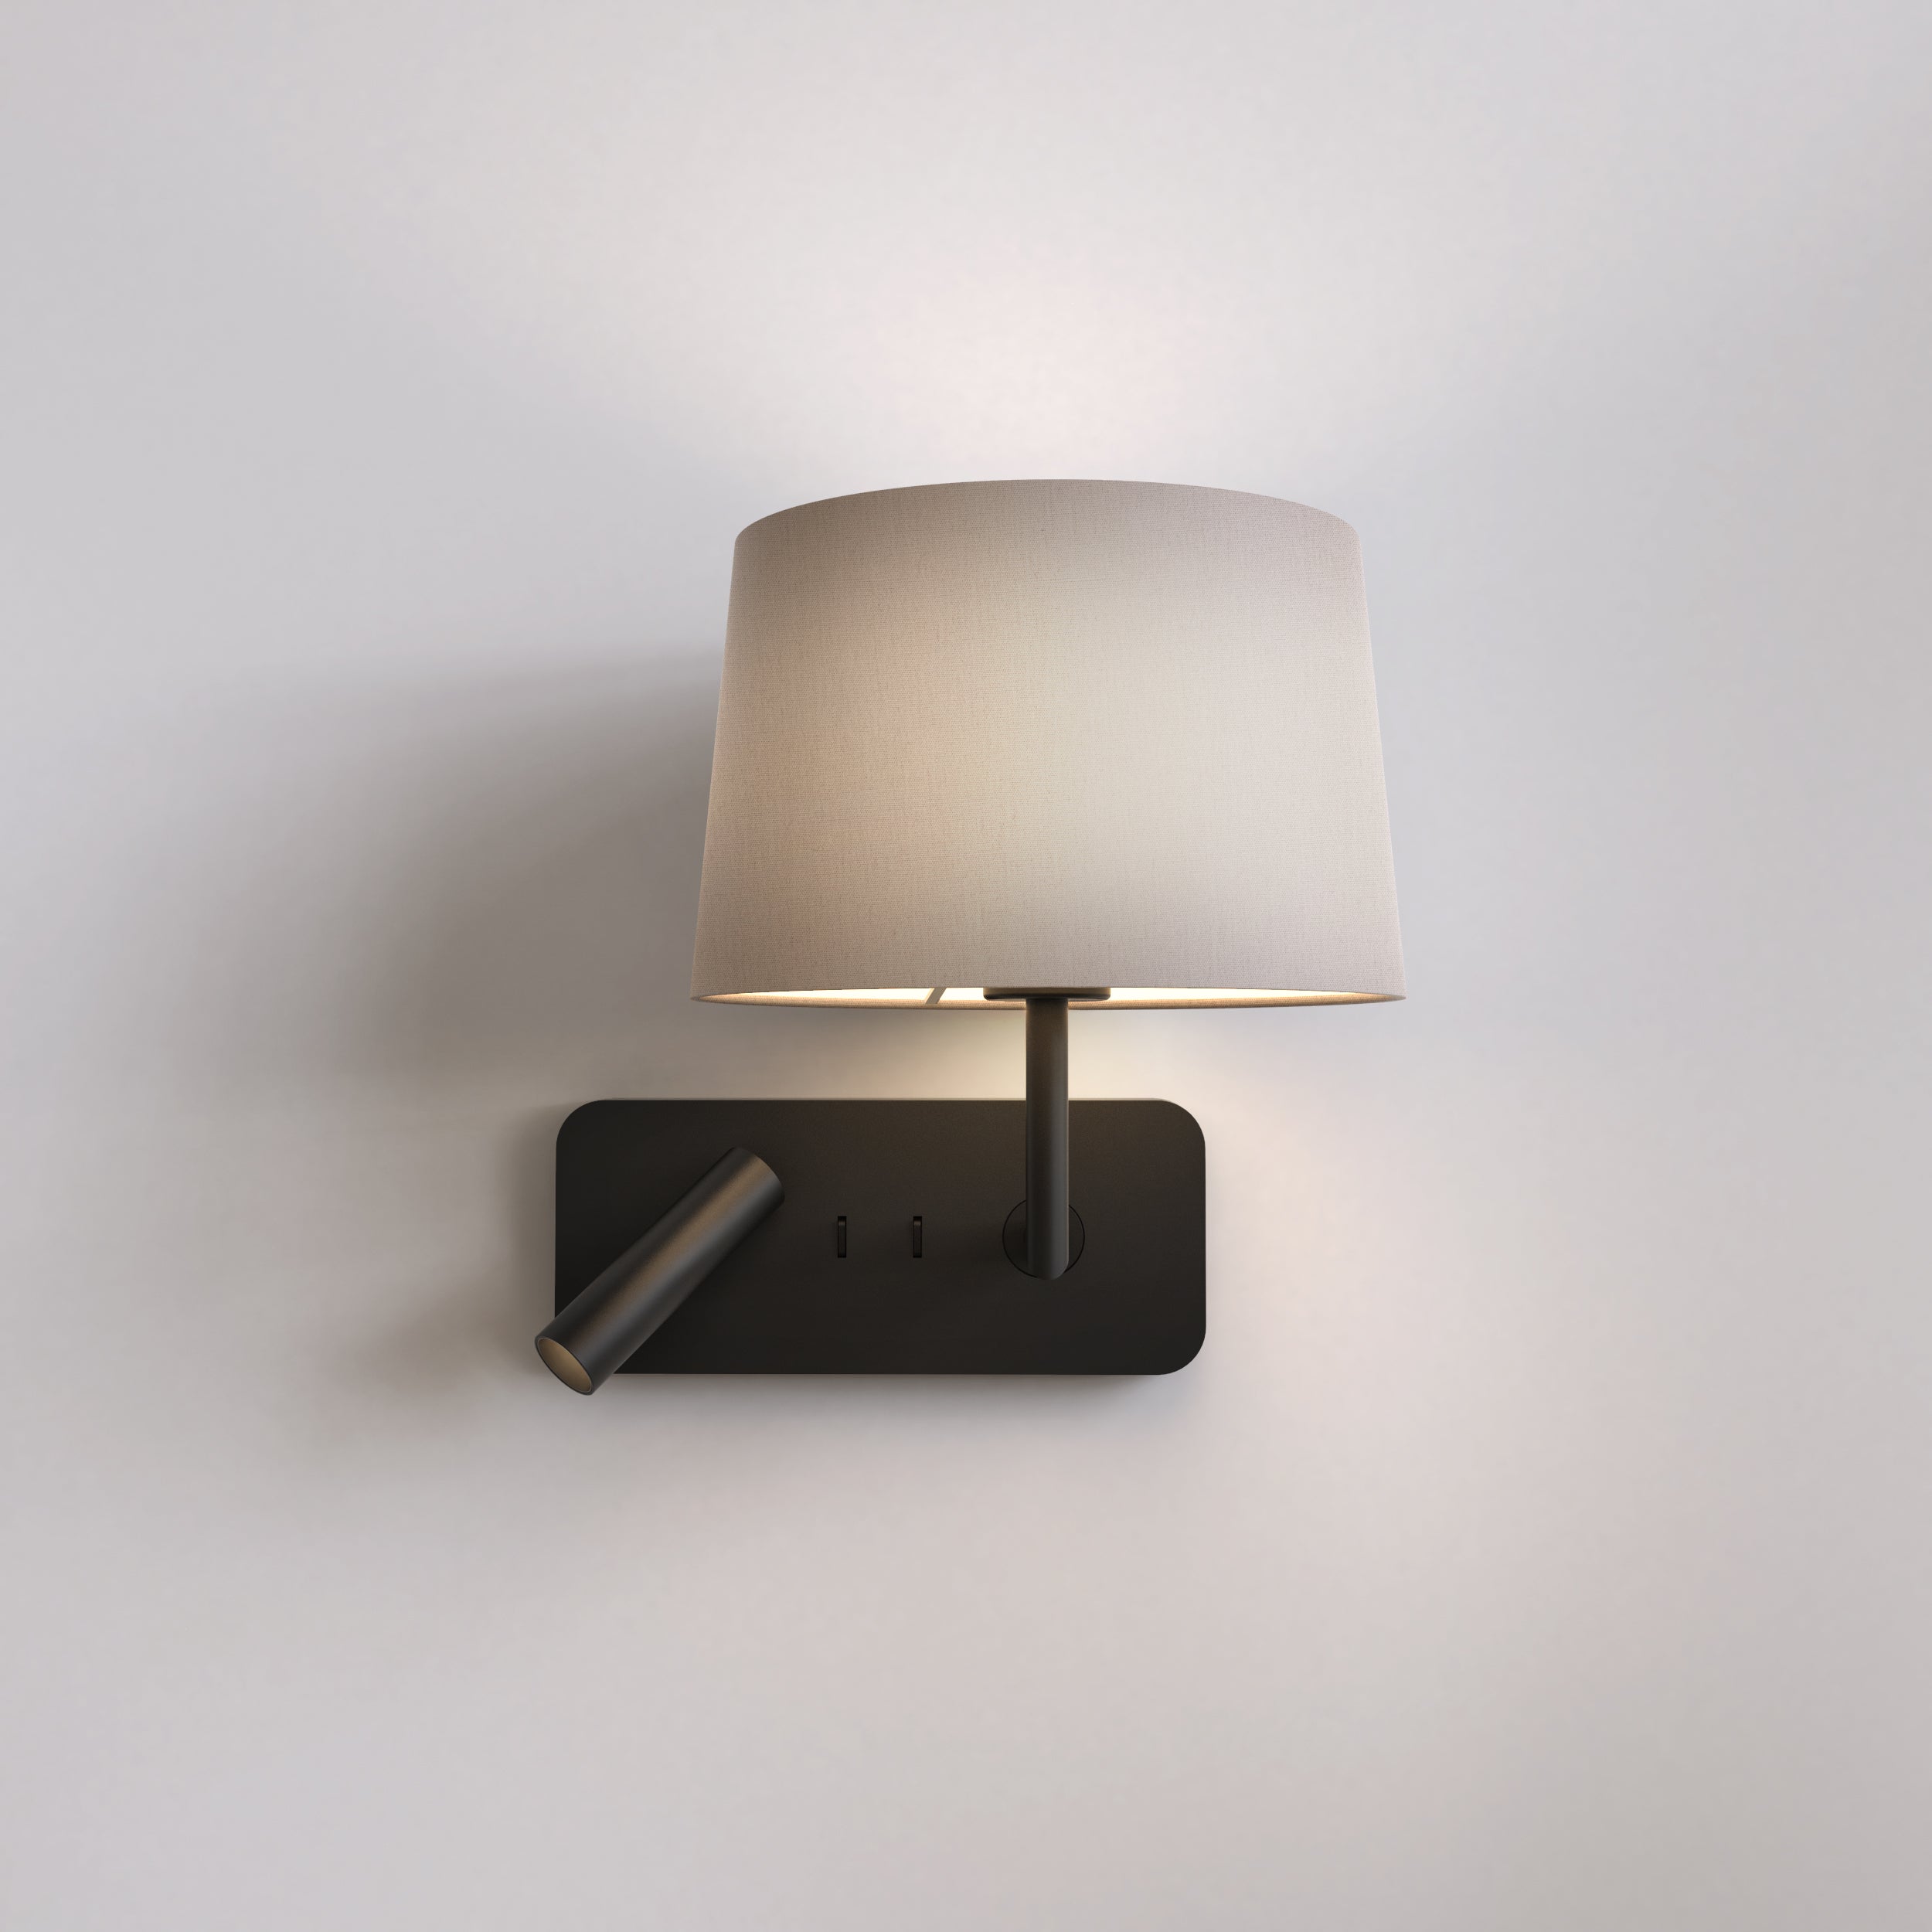 Astro Lighting Side by Side Wall Light Fixtures Astro Lighting   